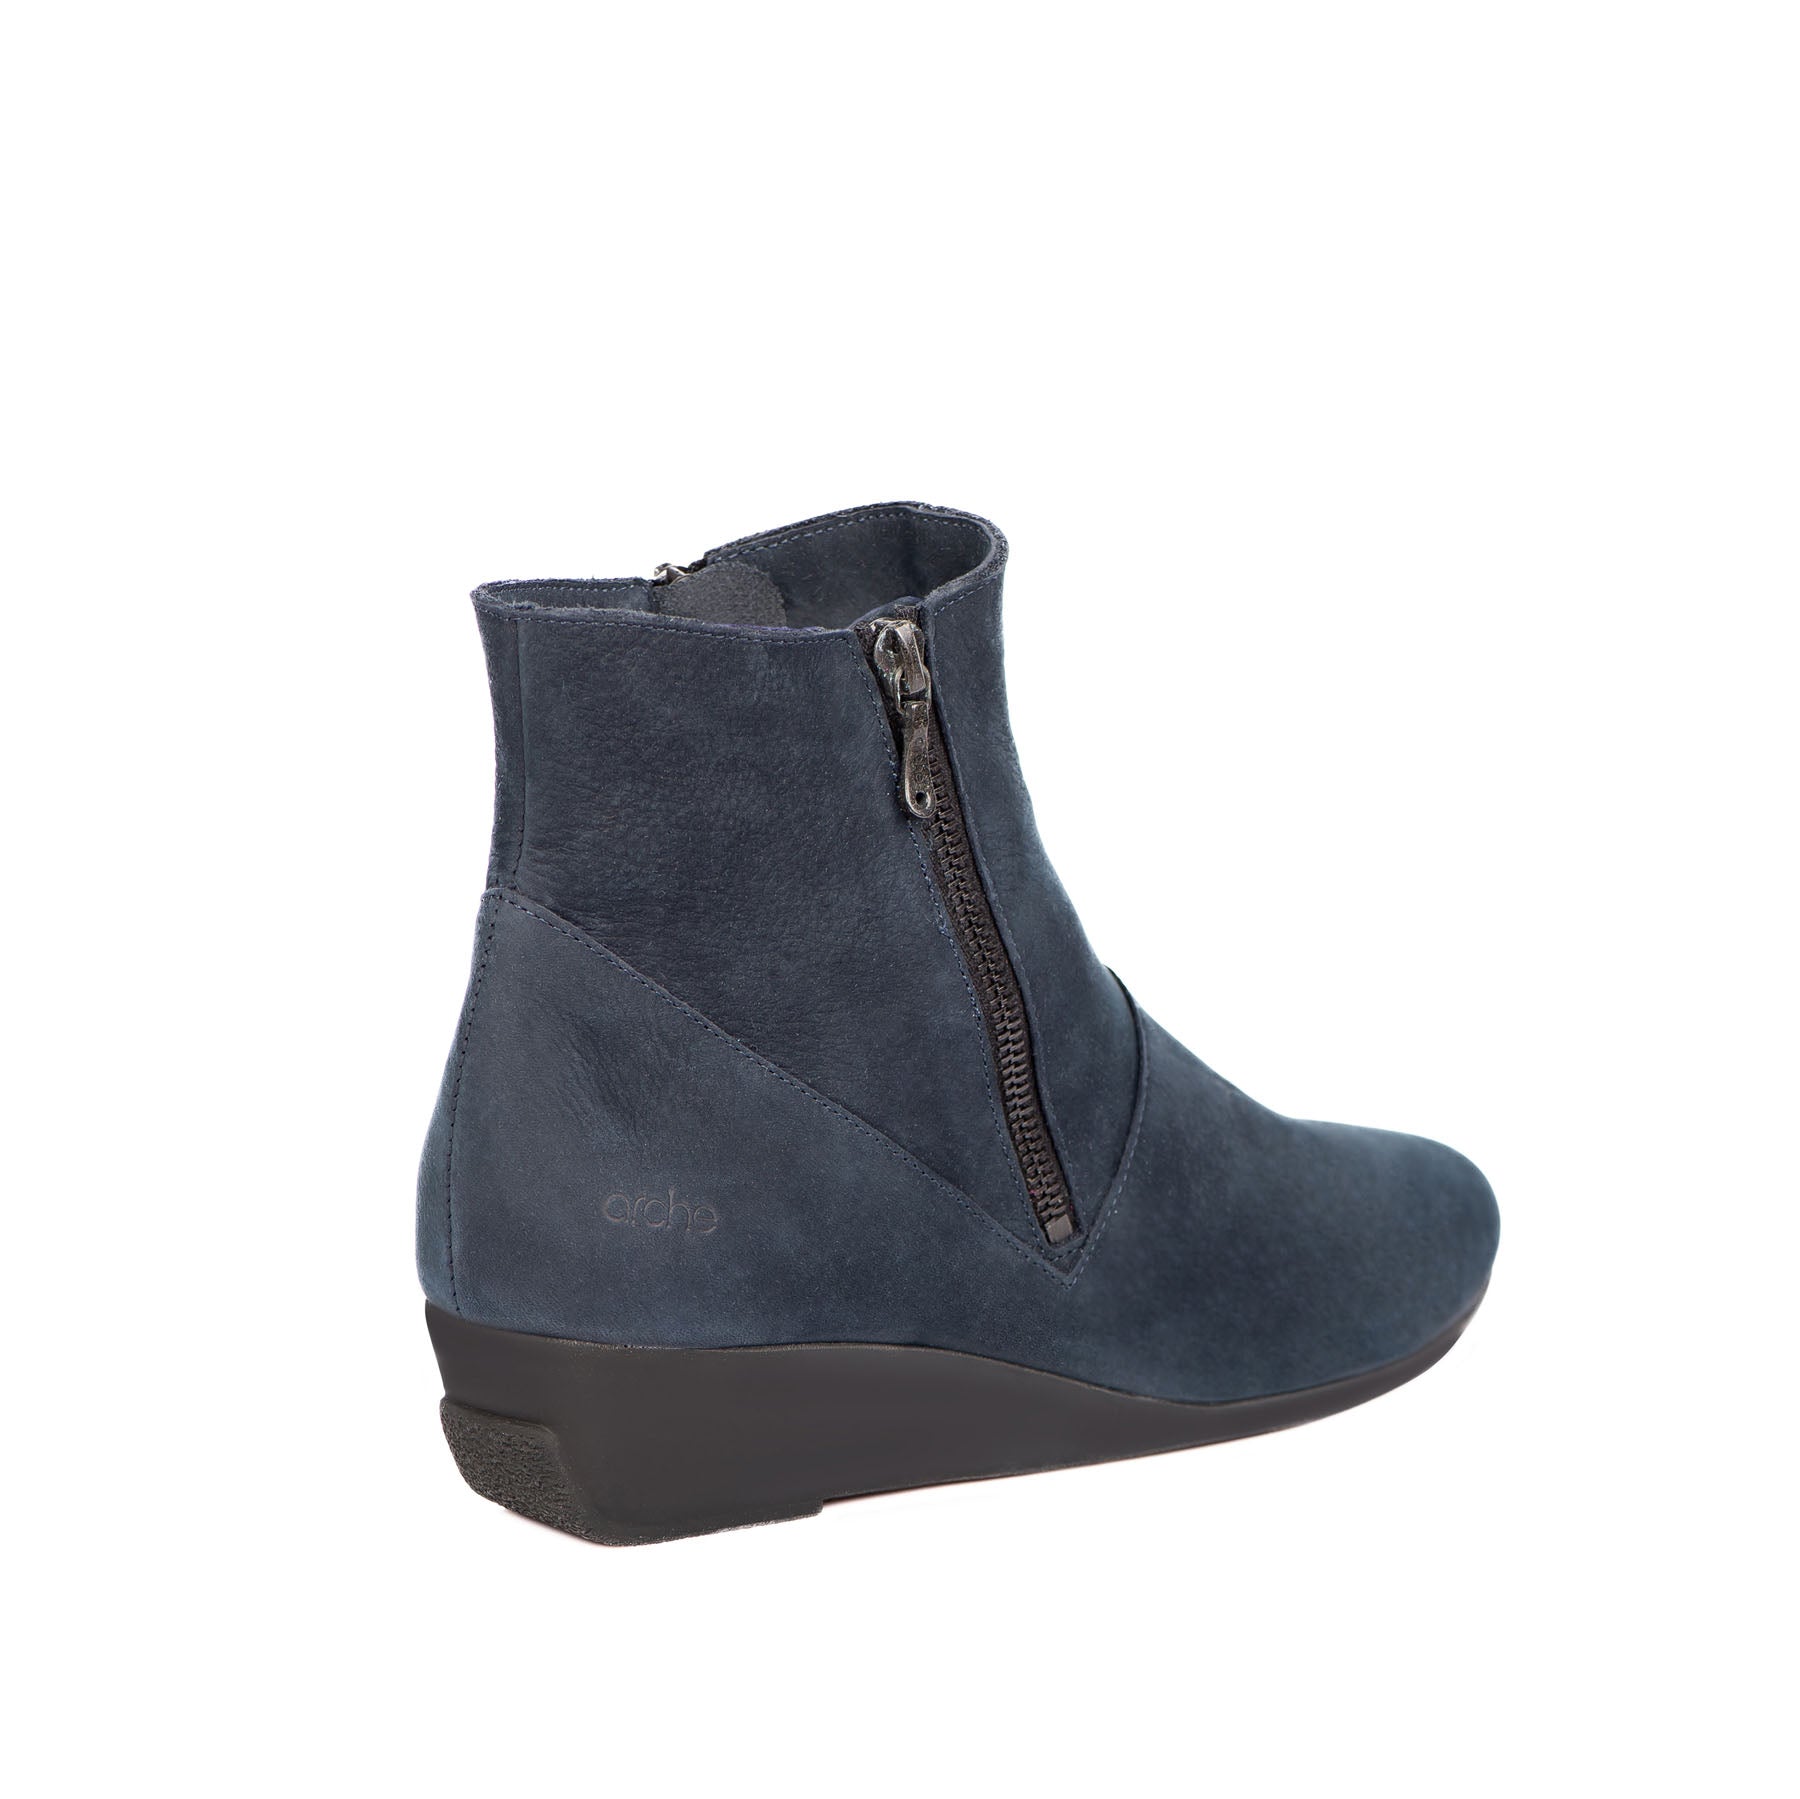 Chic & Simple Arche Boots Anykem - Nuit